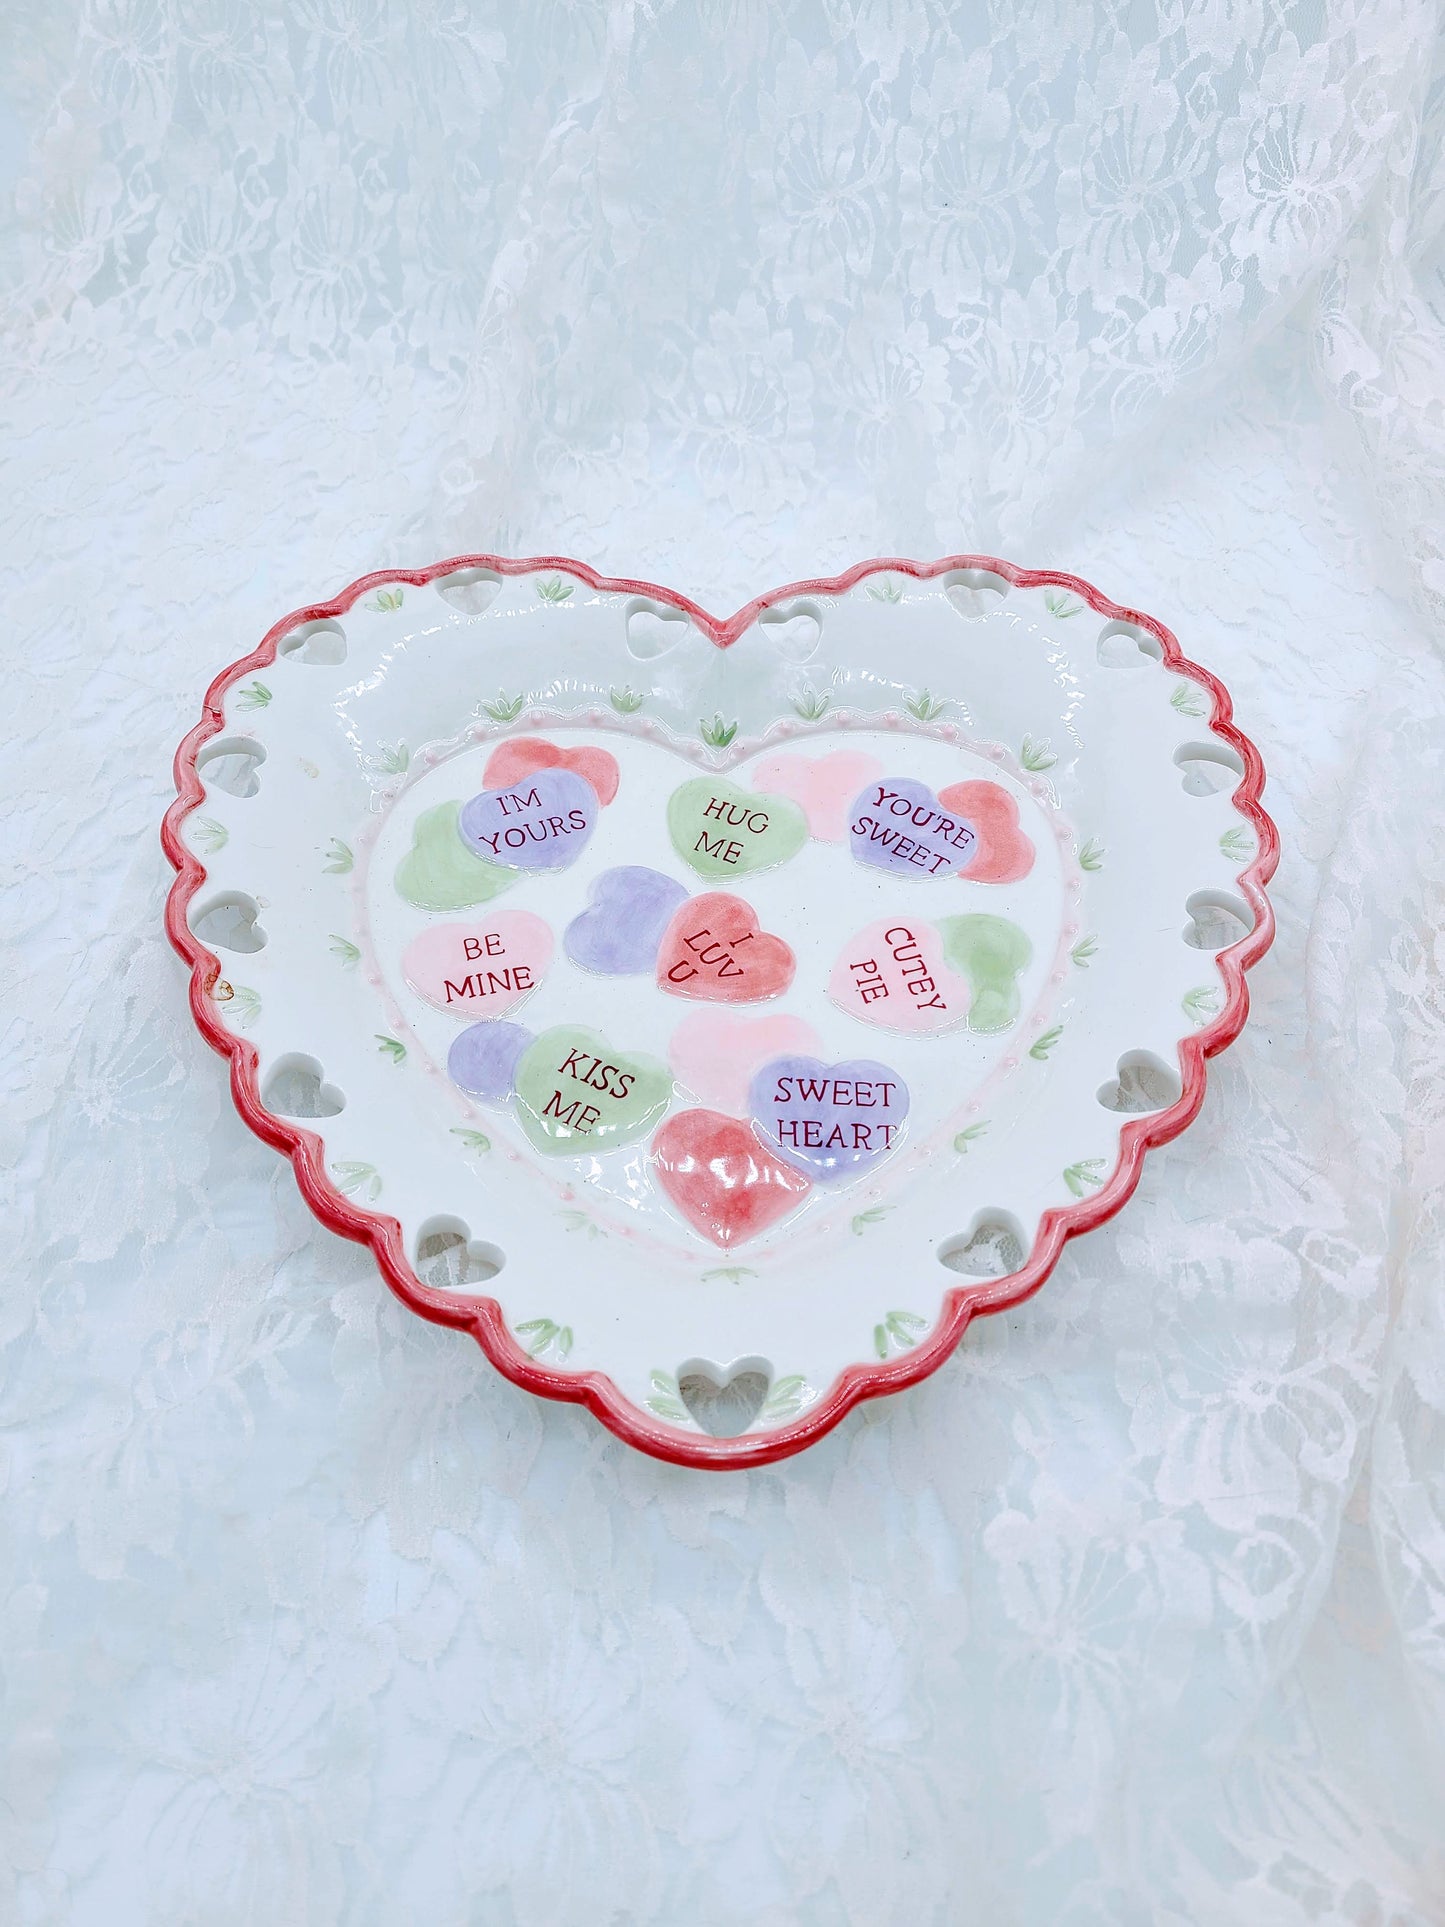 Perfect Valentine's Day Plate for CUPCAKES or anything ~ Candies, Serving, or Display